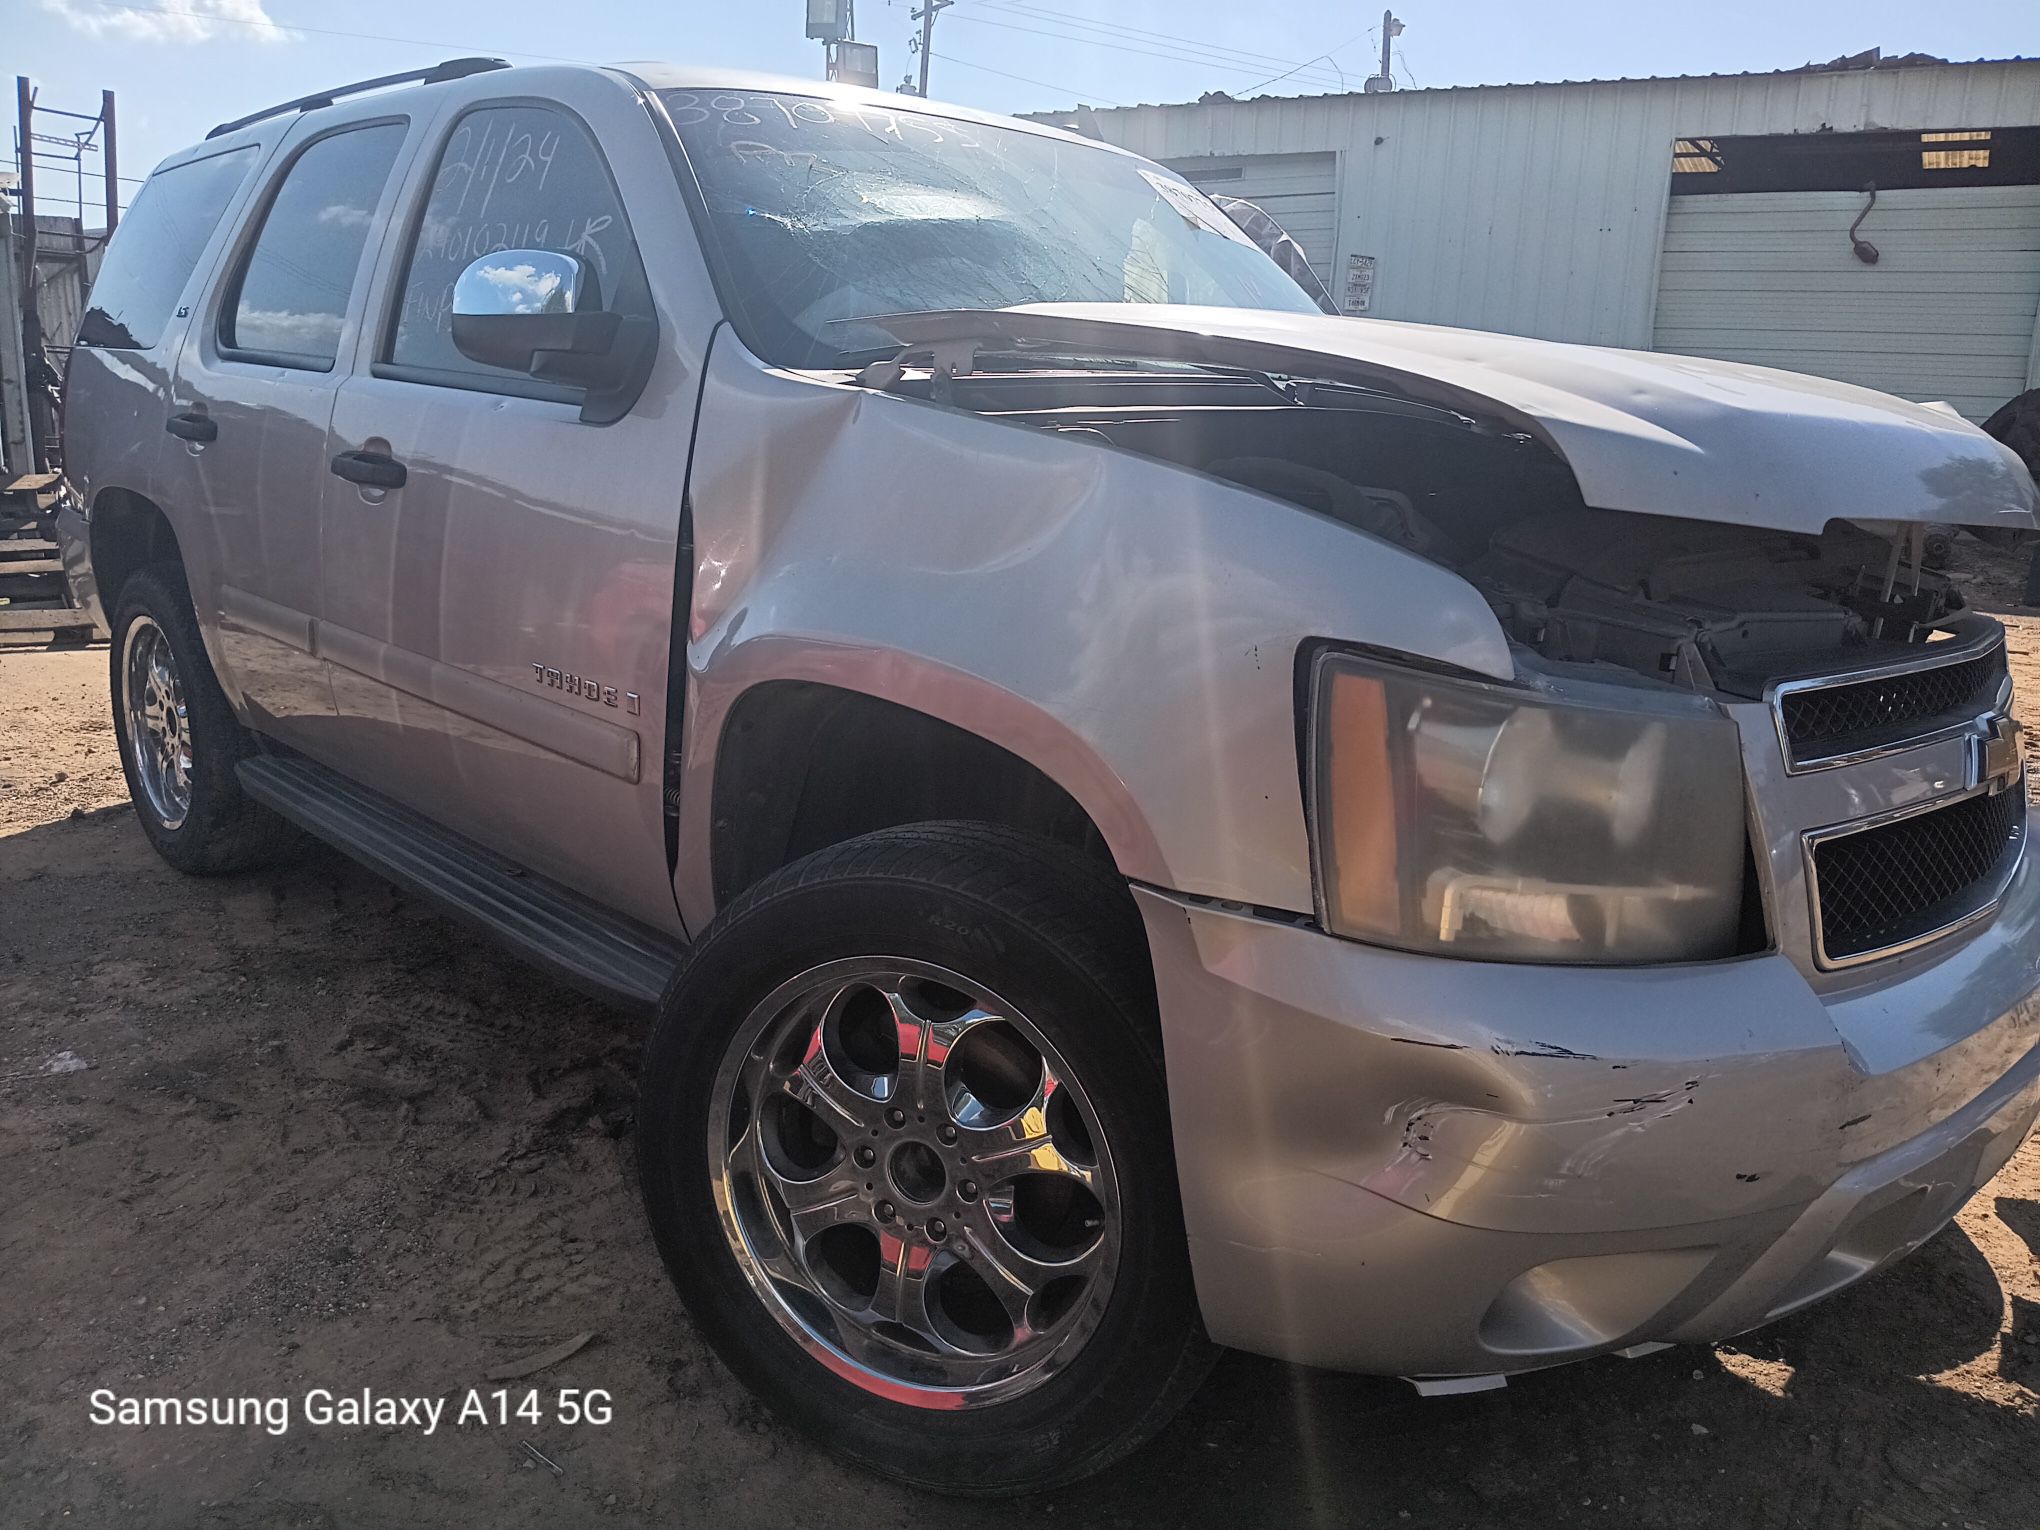 2007 Chevy Tahoe - Parts Only #DF8